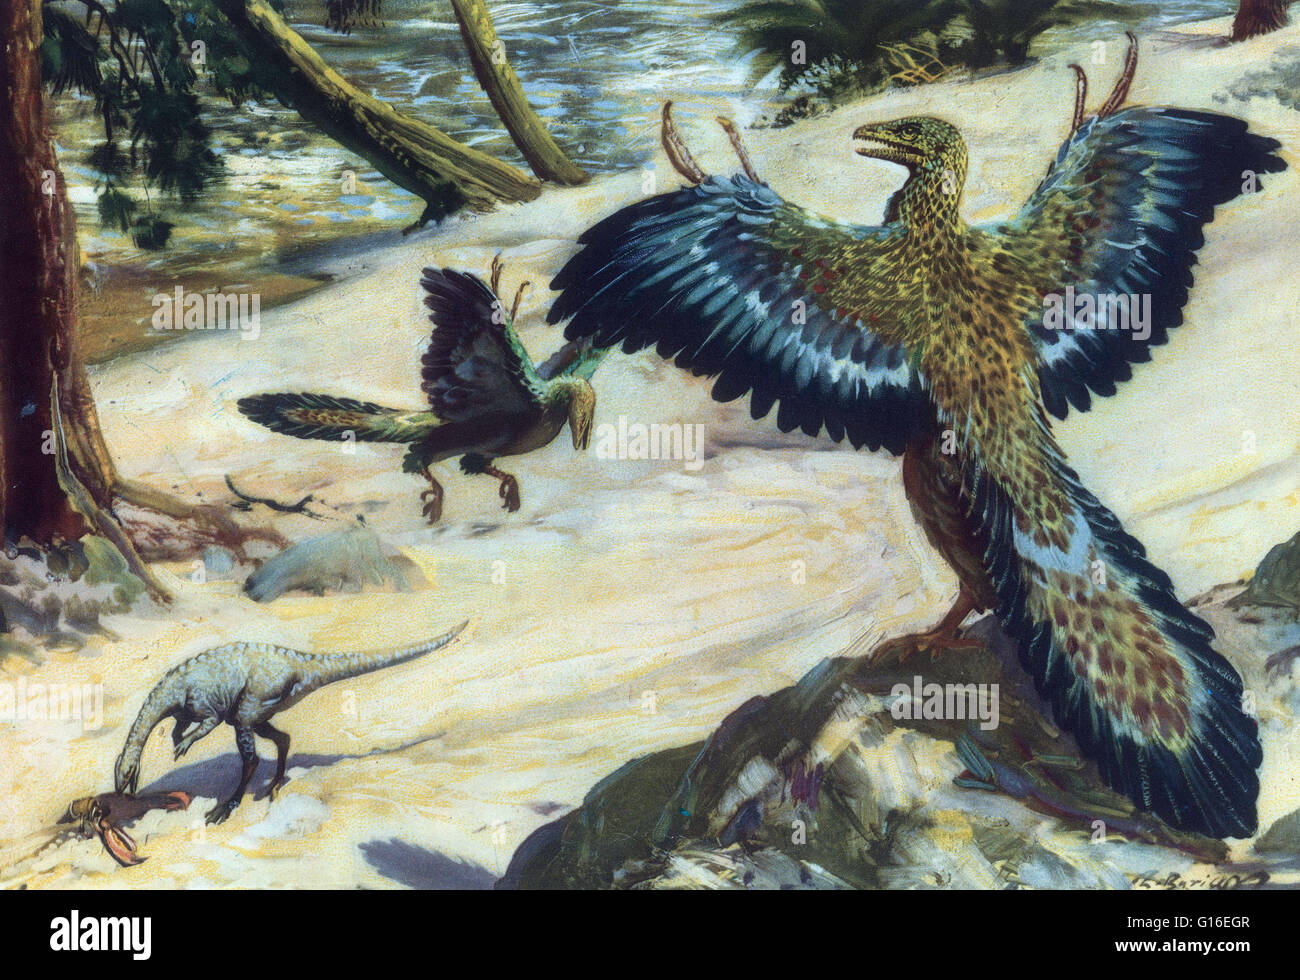 Archaeopteryx, sometimes referred to by its German name Urvogel (original bird or first bird), is a genus of early bird that is transitional between feathered dinosaurs and modern birds. It lived in the Late Jurassic period around 150 million years ago ha Stock Photo